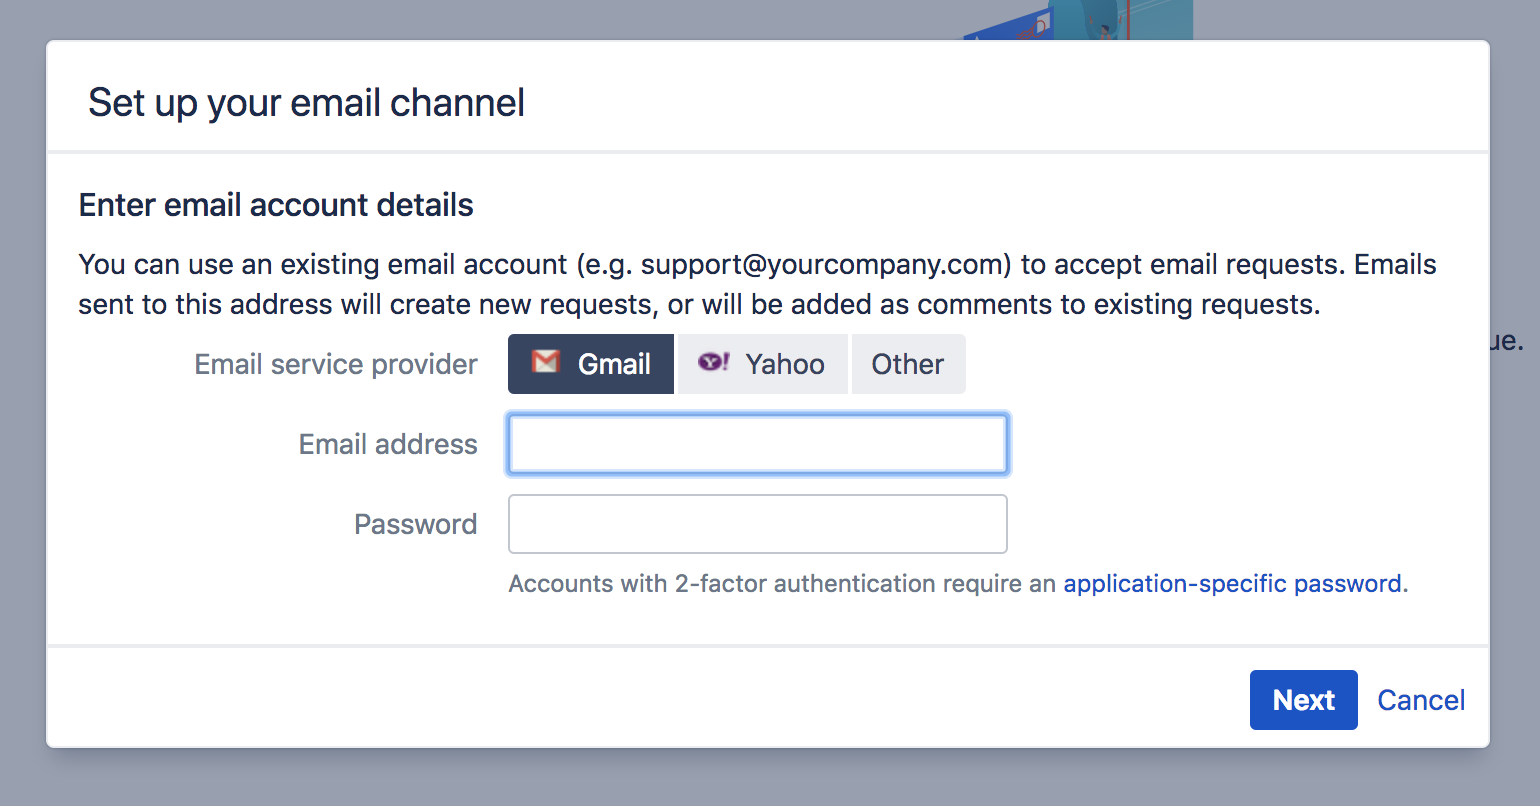 Set up your email channel page with empty fields for email service provider, email address, and password.